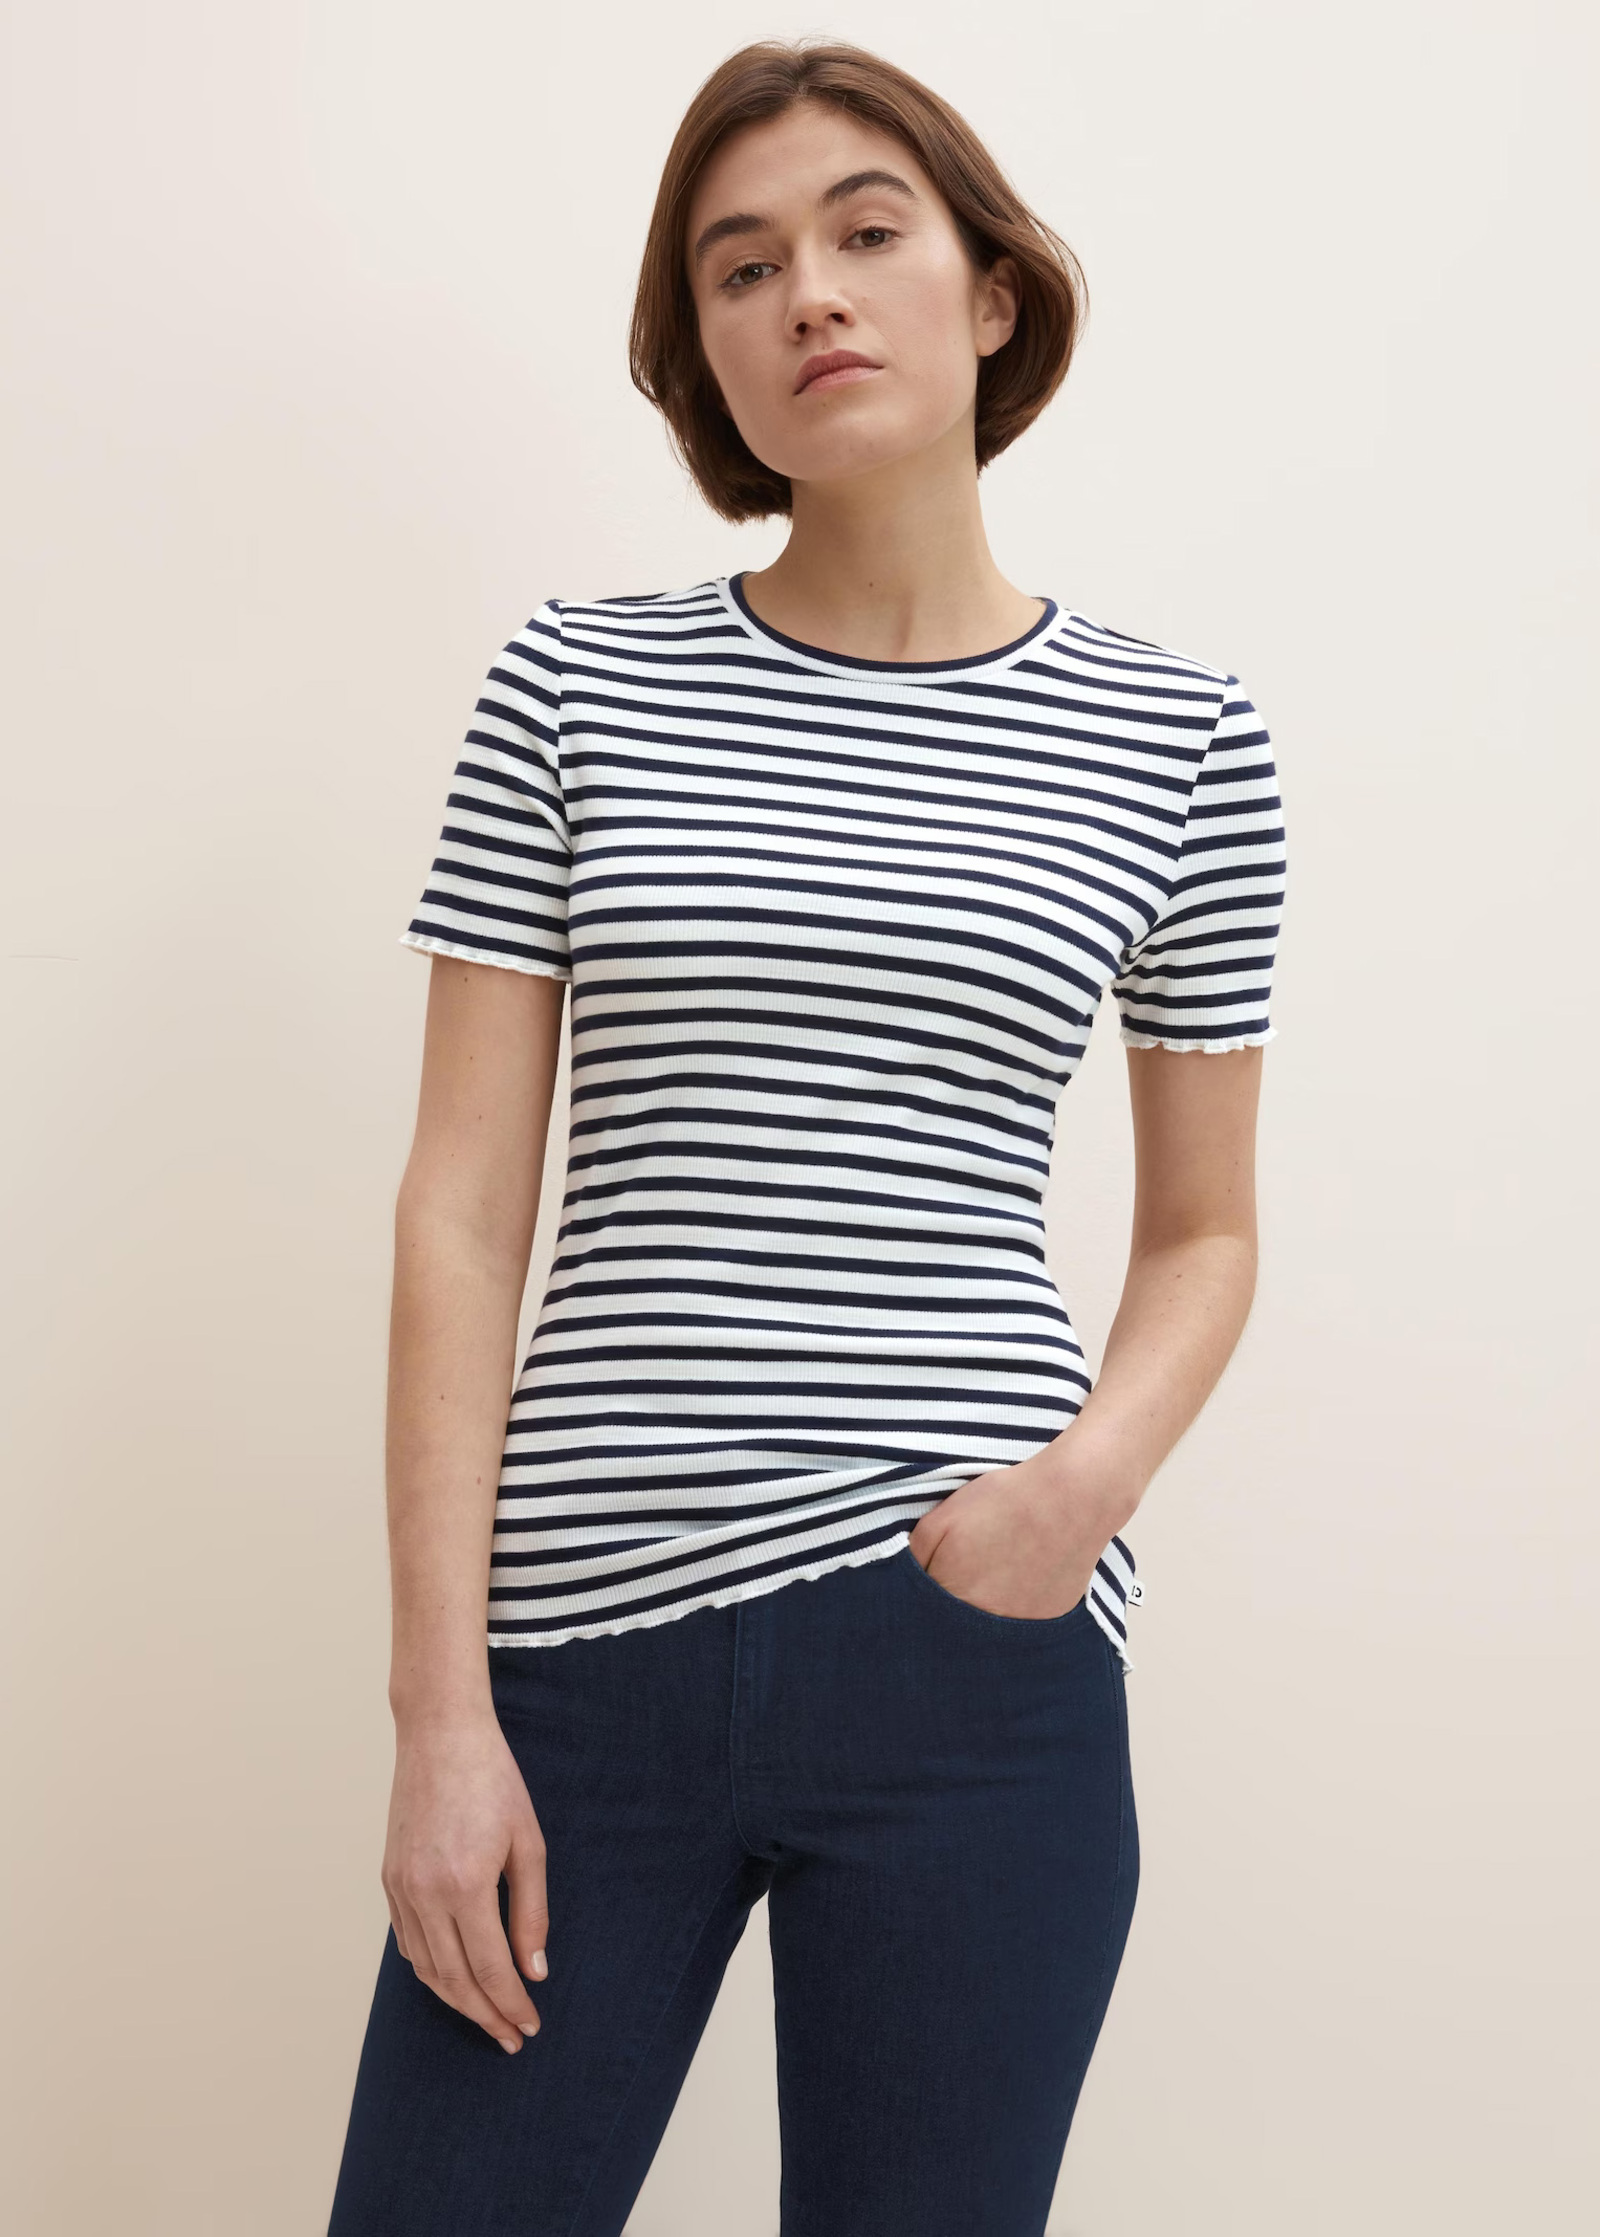 Tom Tailor® fit t-shirt - M Size with Stripe White Stripes Slim Navy